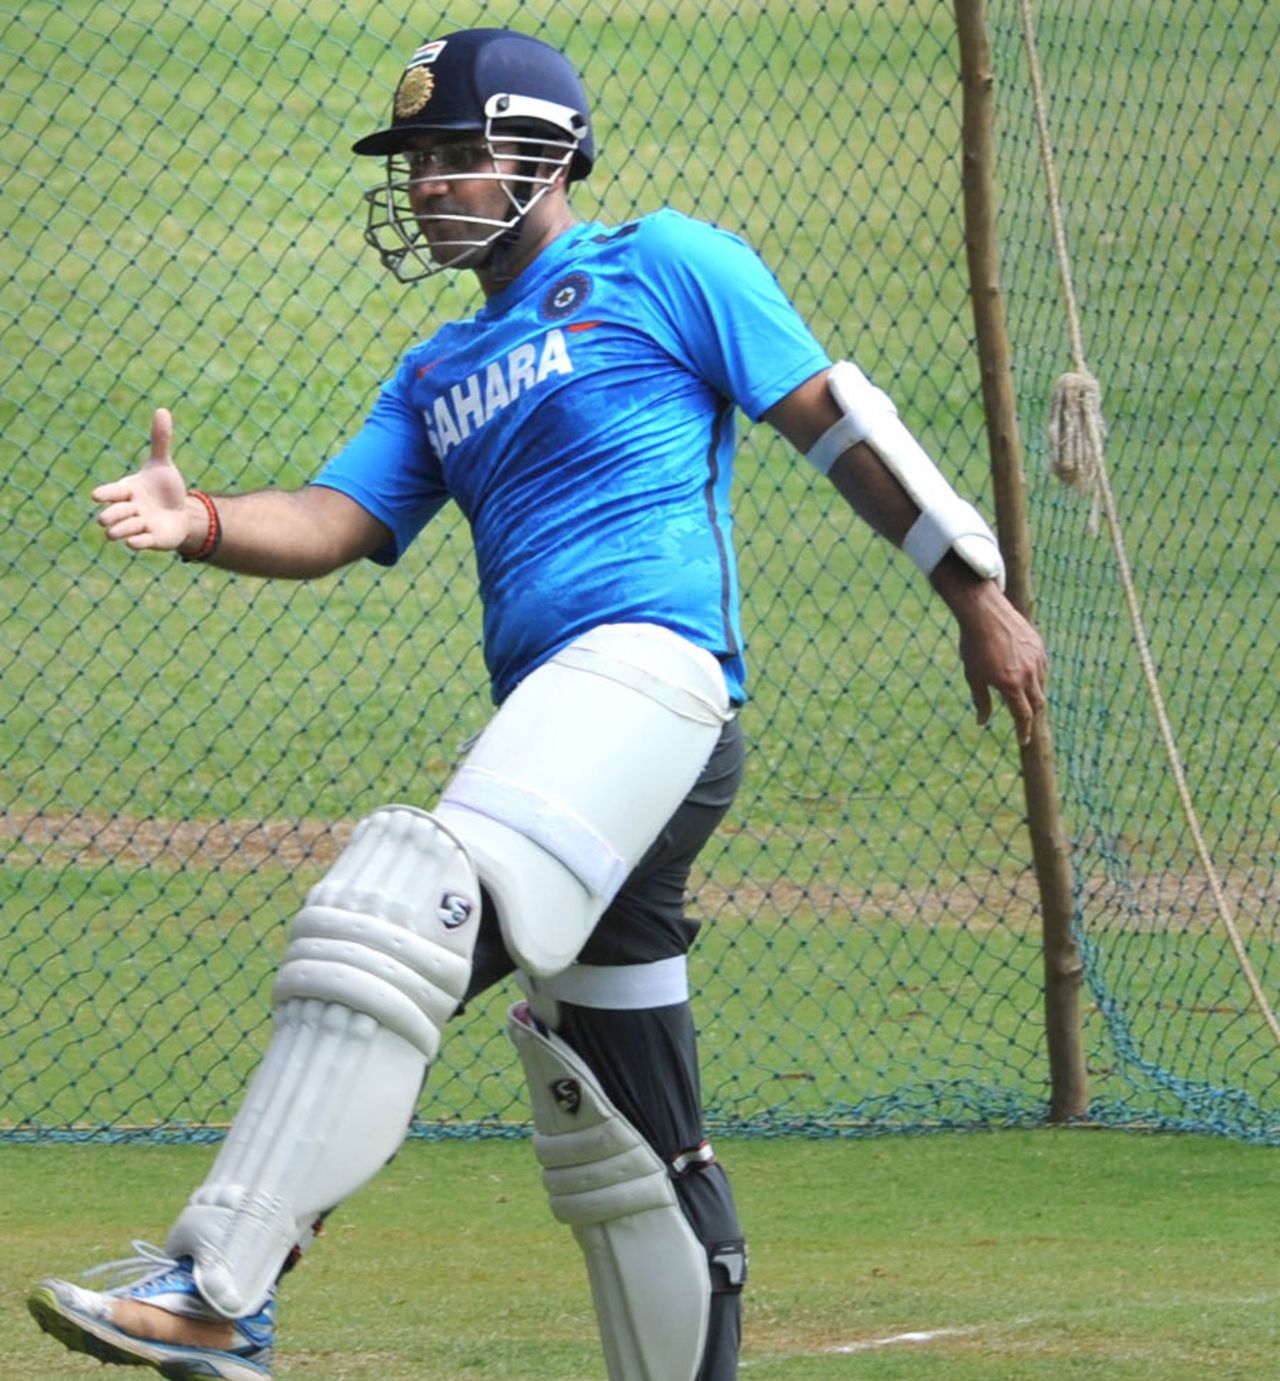 Virender Sehwag, in his new spectacles, trains at India's conditioning camp in Bangalore, February 17, 2013